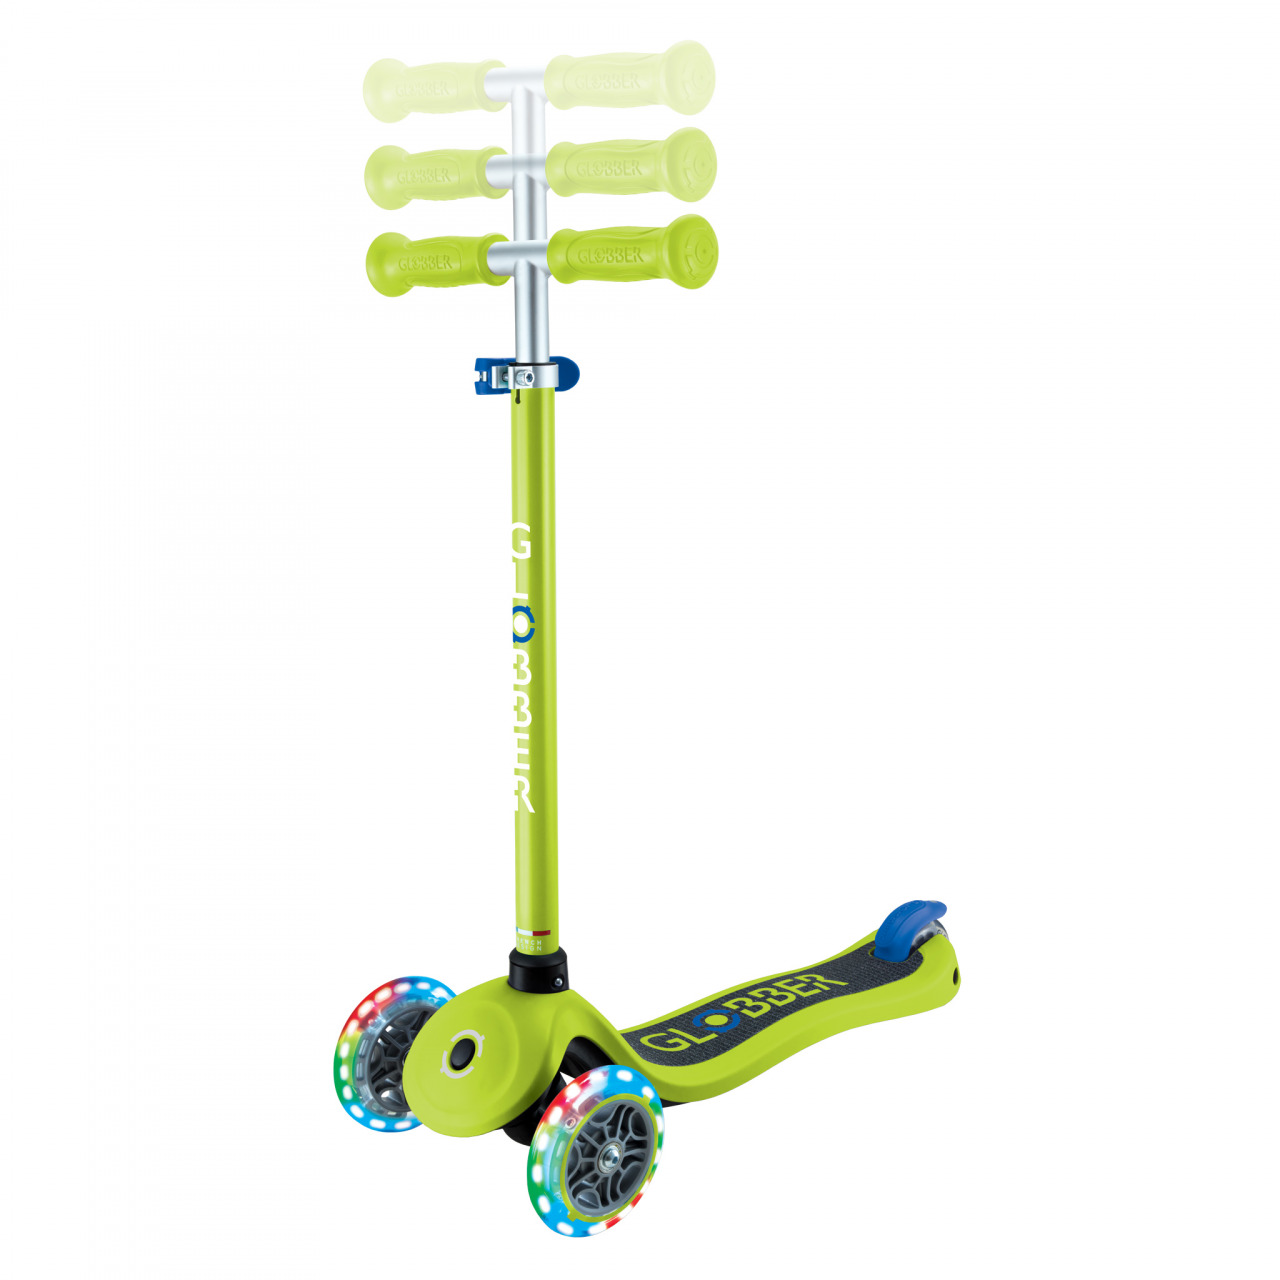 423 606 4 Adjustable Scooter With Led Lights